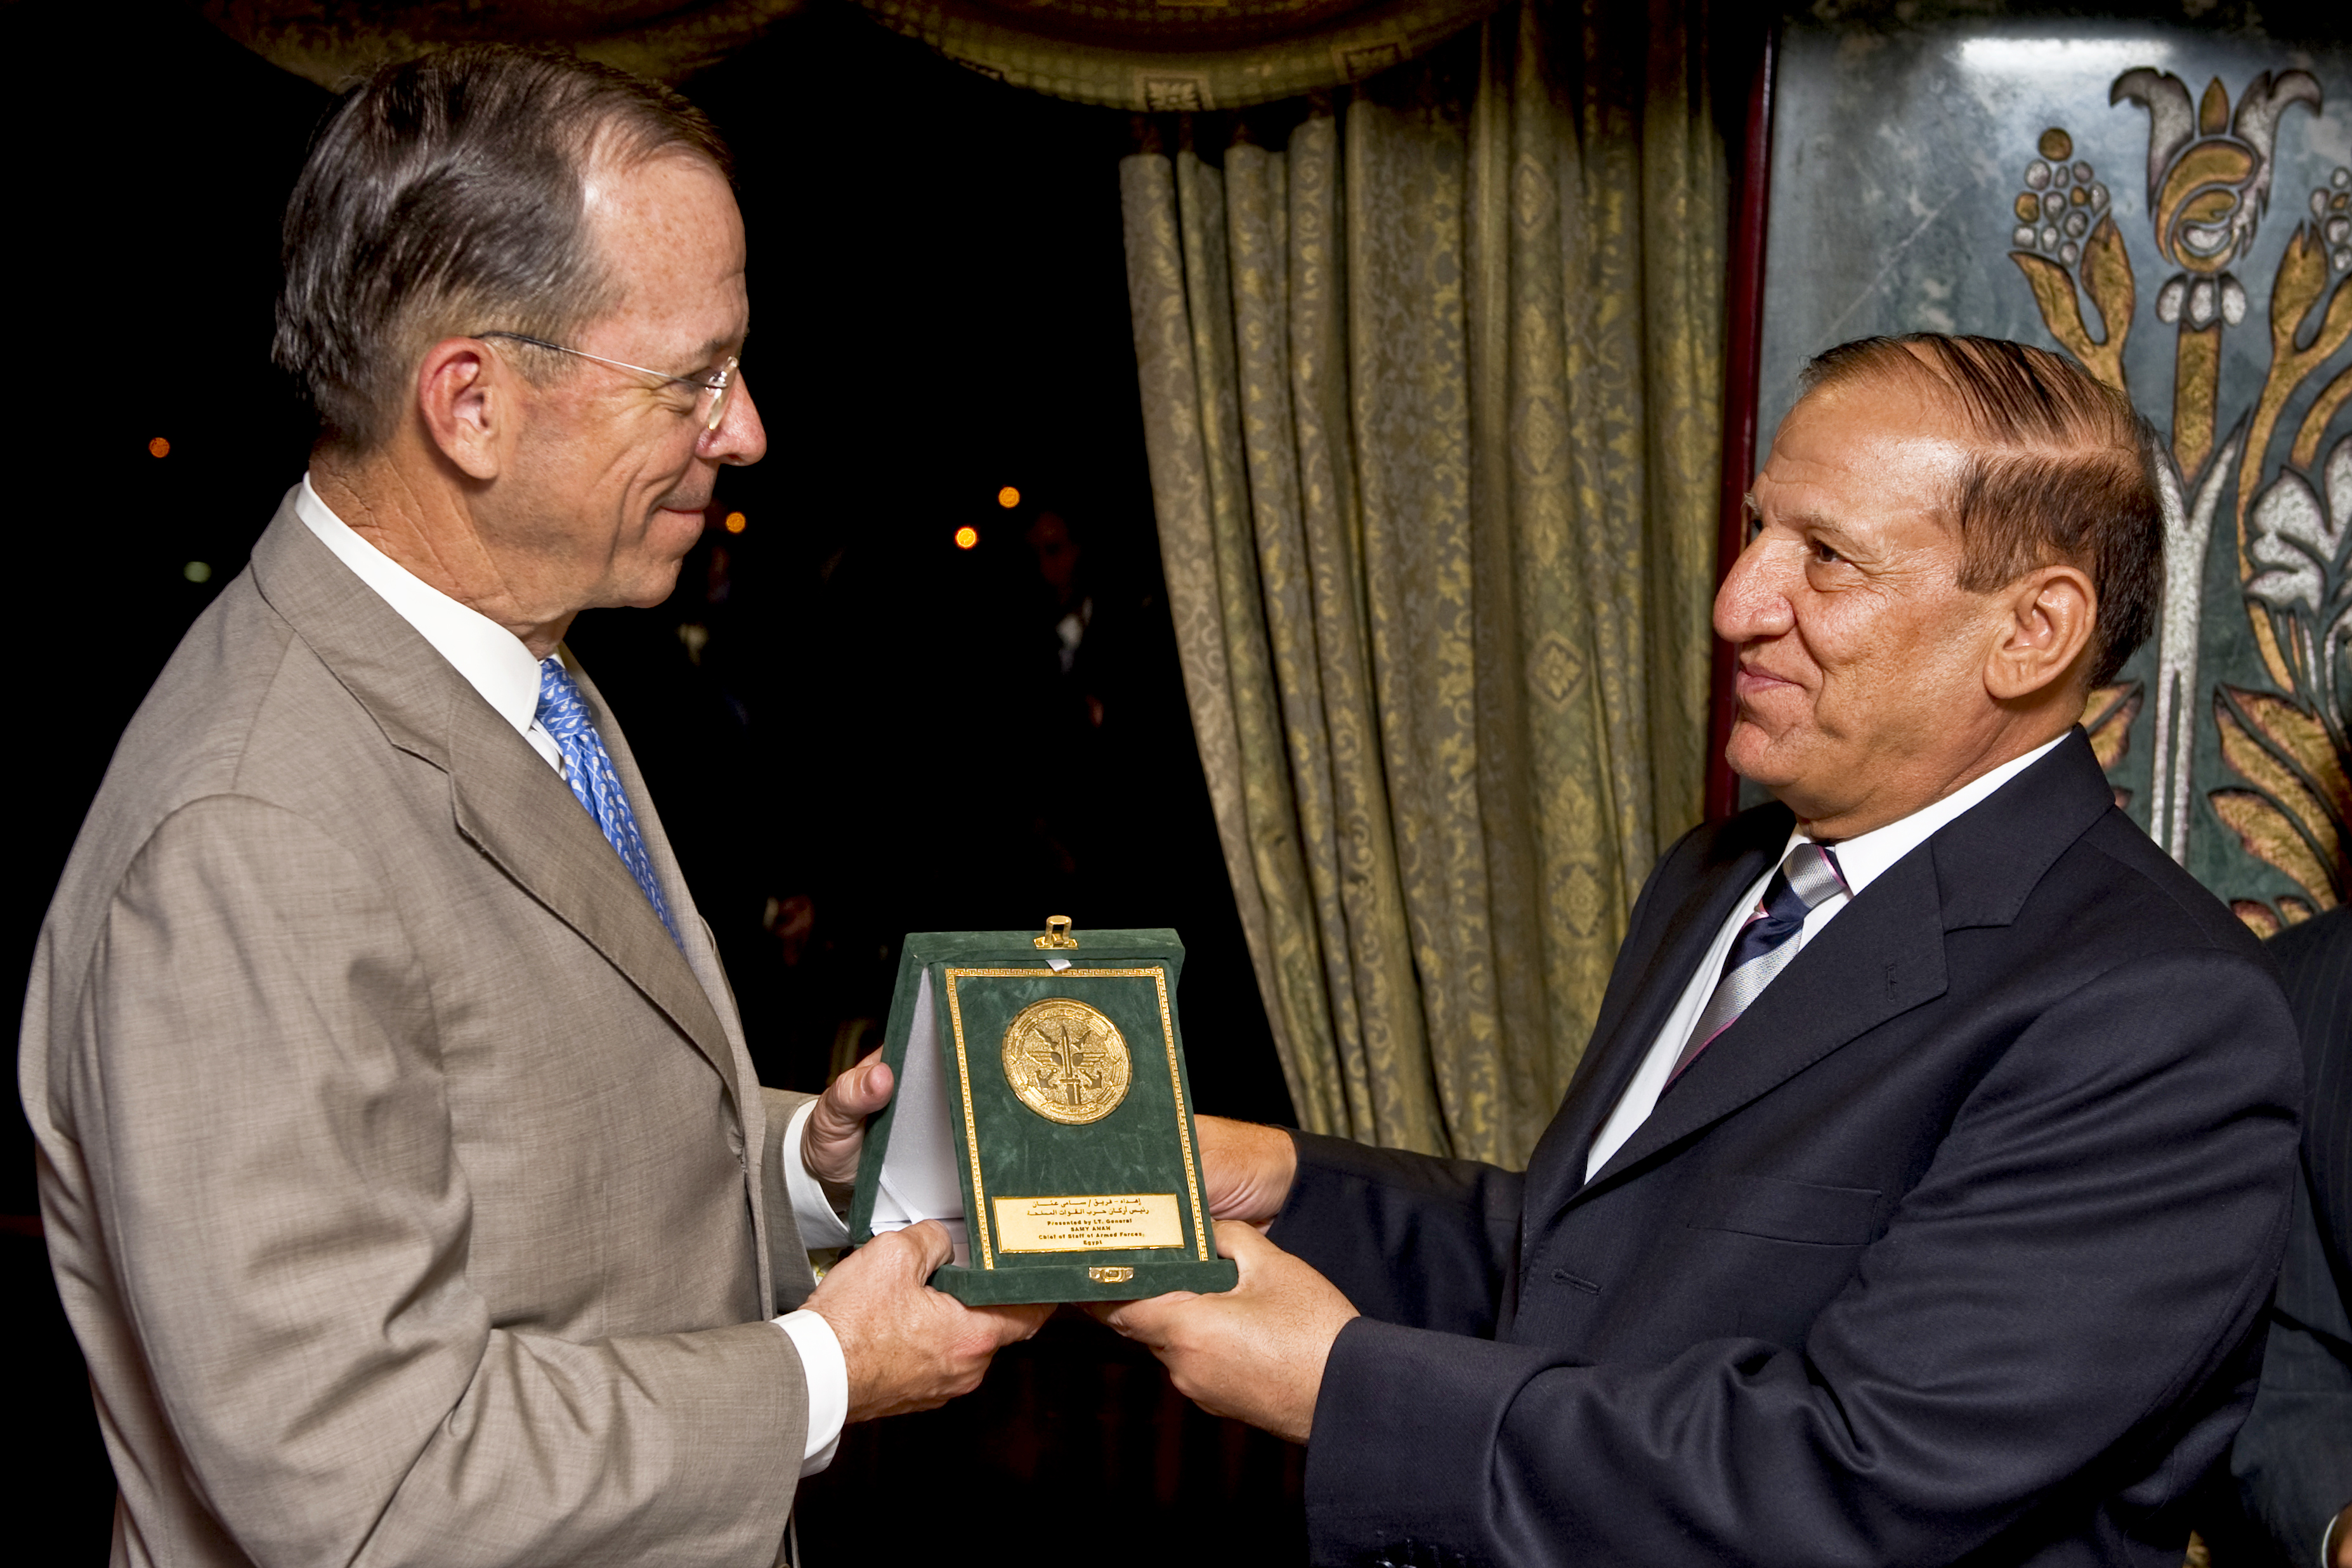 Egyptian Army Lt. General Sami Enan, chief of staff of the Egyptian Armed Forces, presents an award to U.S. Navy Admiral Mike Mullen, the chairman of the Joint Chiefs of Staff, Cairo, June 7, 2011.